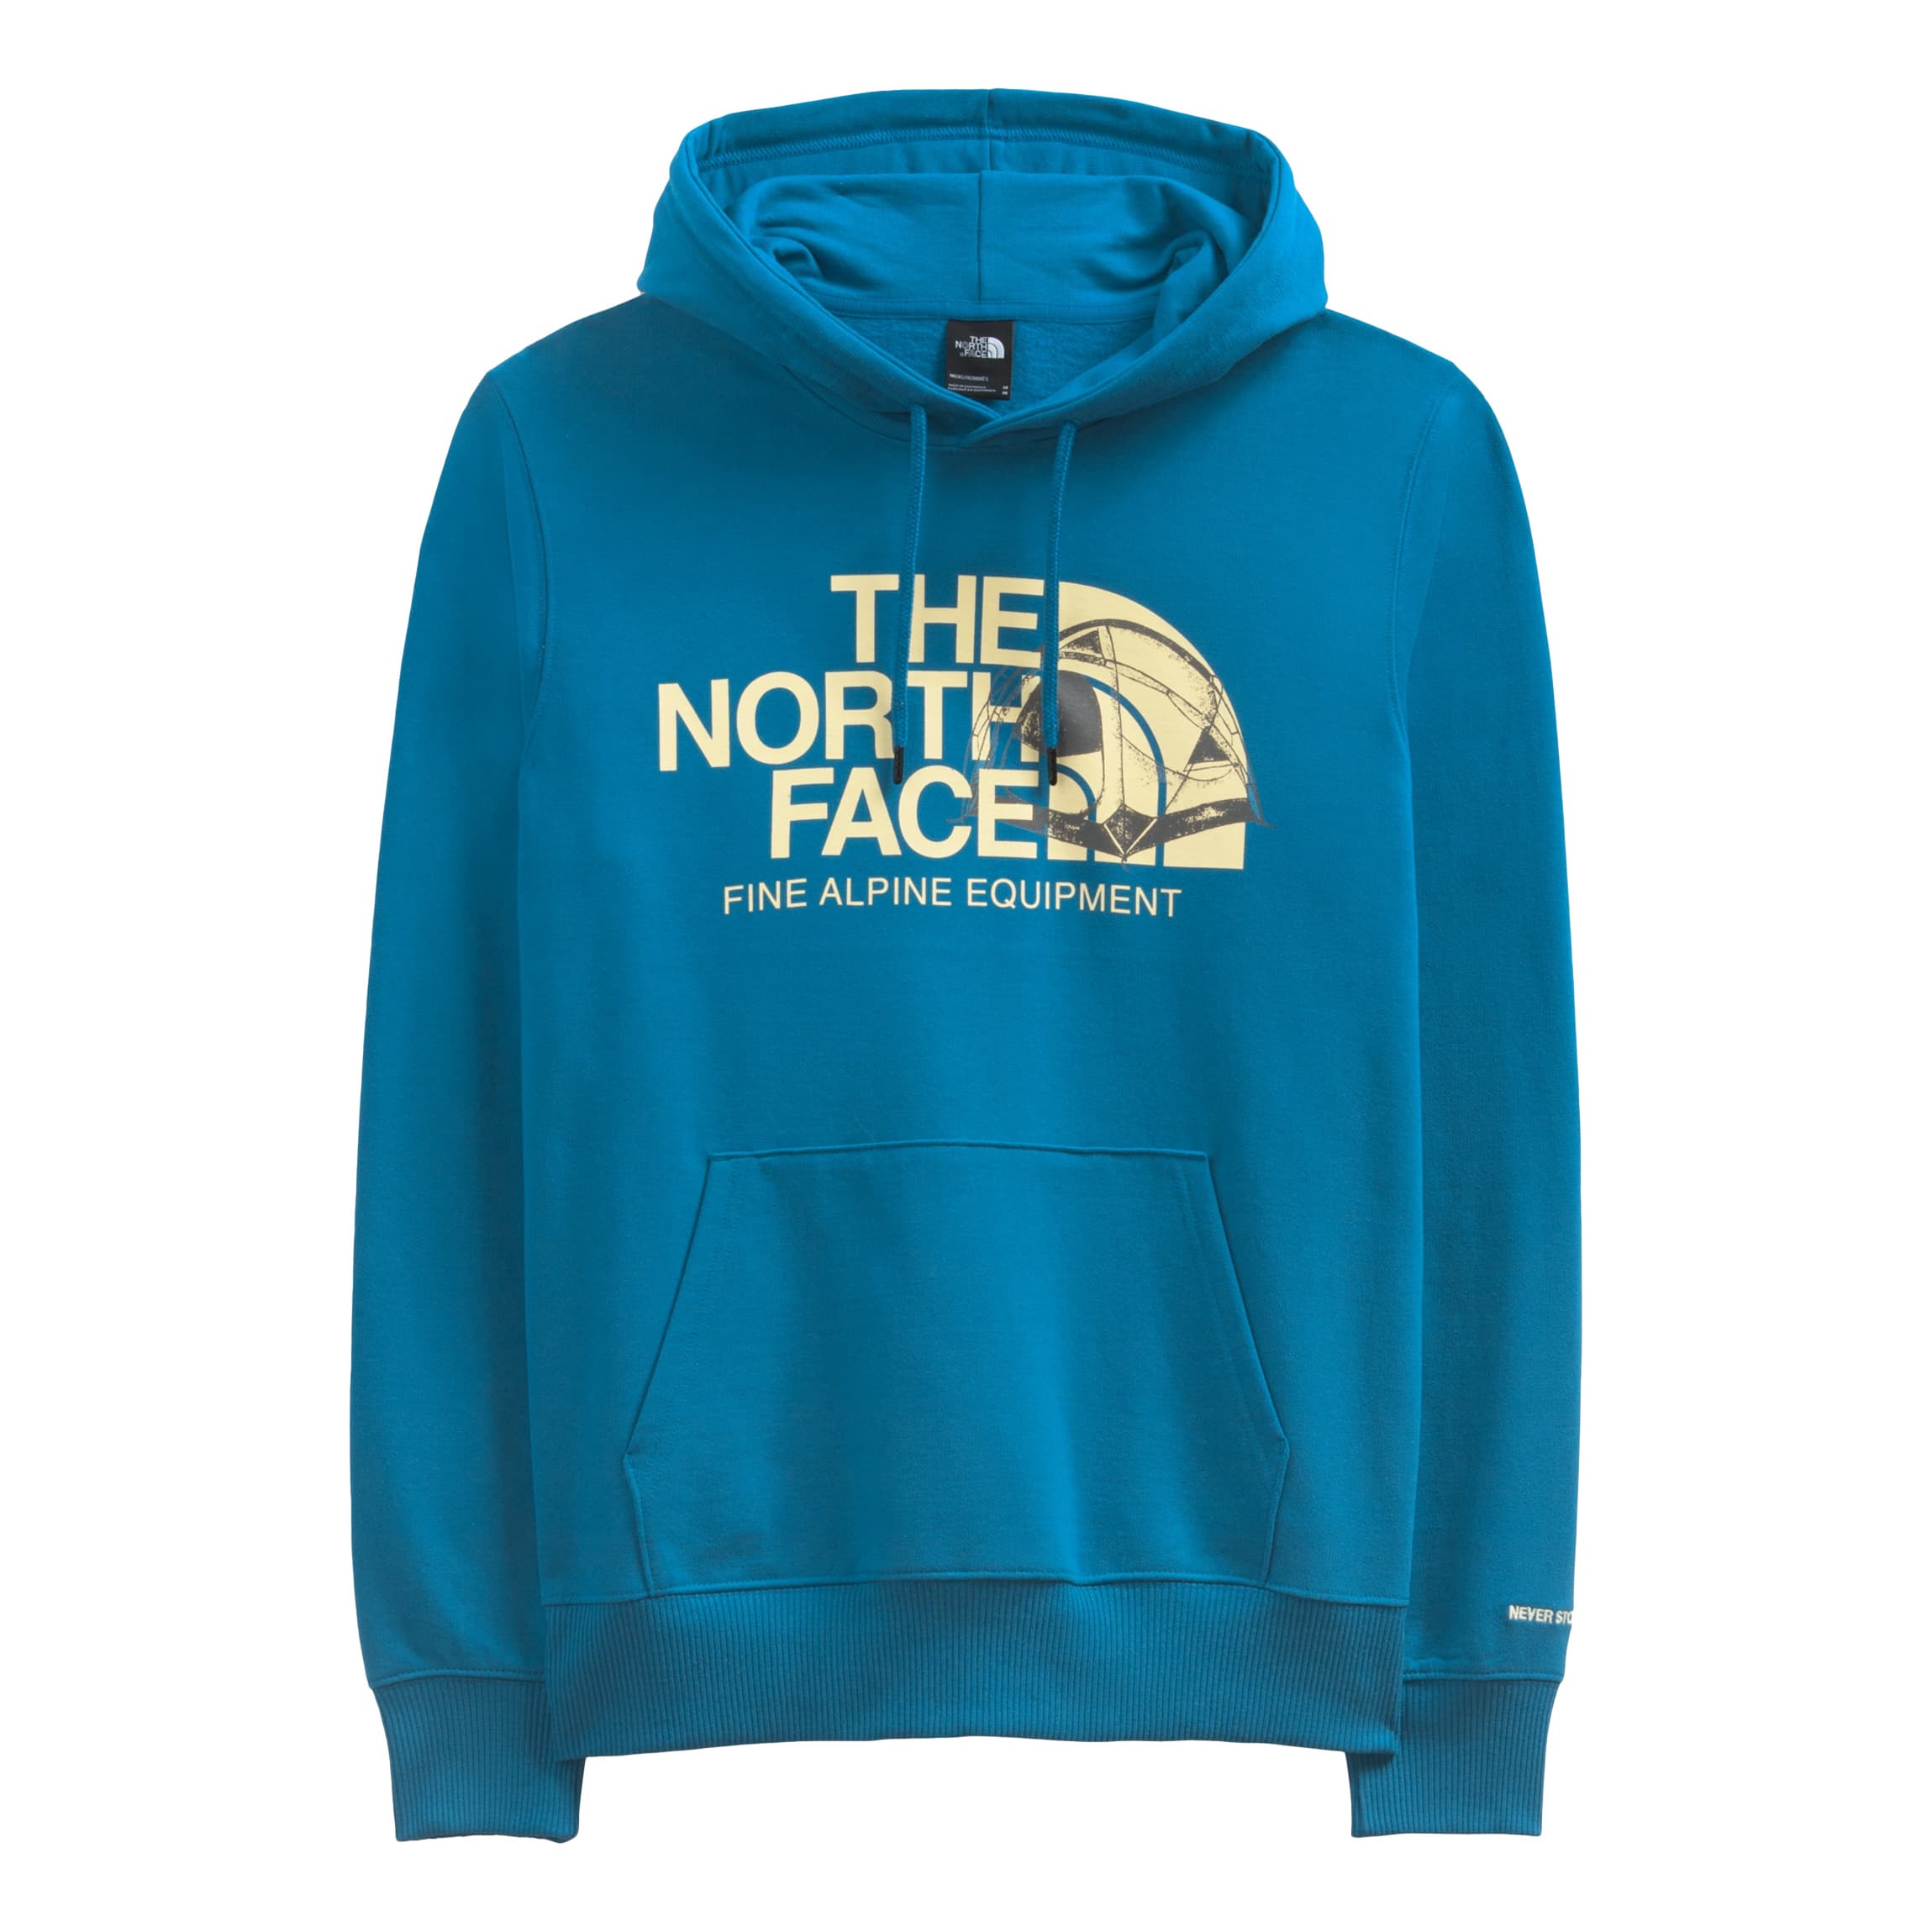 The North Face® Men’s Logo Play Recycled Pullover Hoodie - Banff Blue